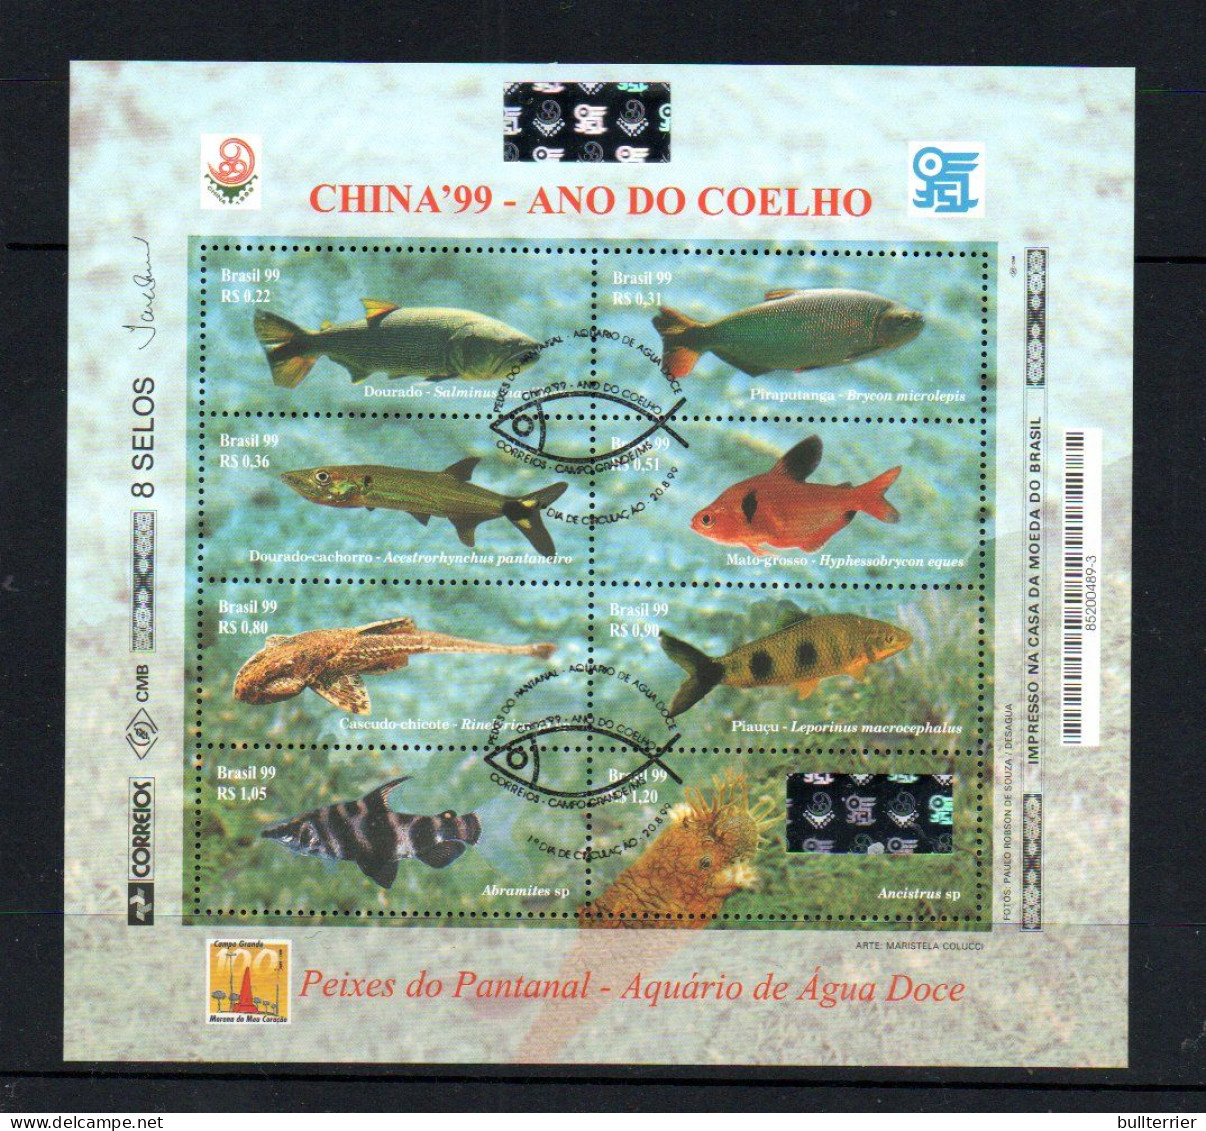 HOLOGRAMS - BRAZIL - 1999- CHINA EXPO FISHES SHEETLET OF 8 FINE USED - Holograms